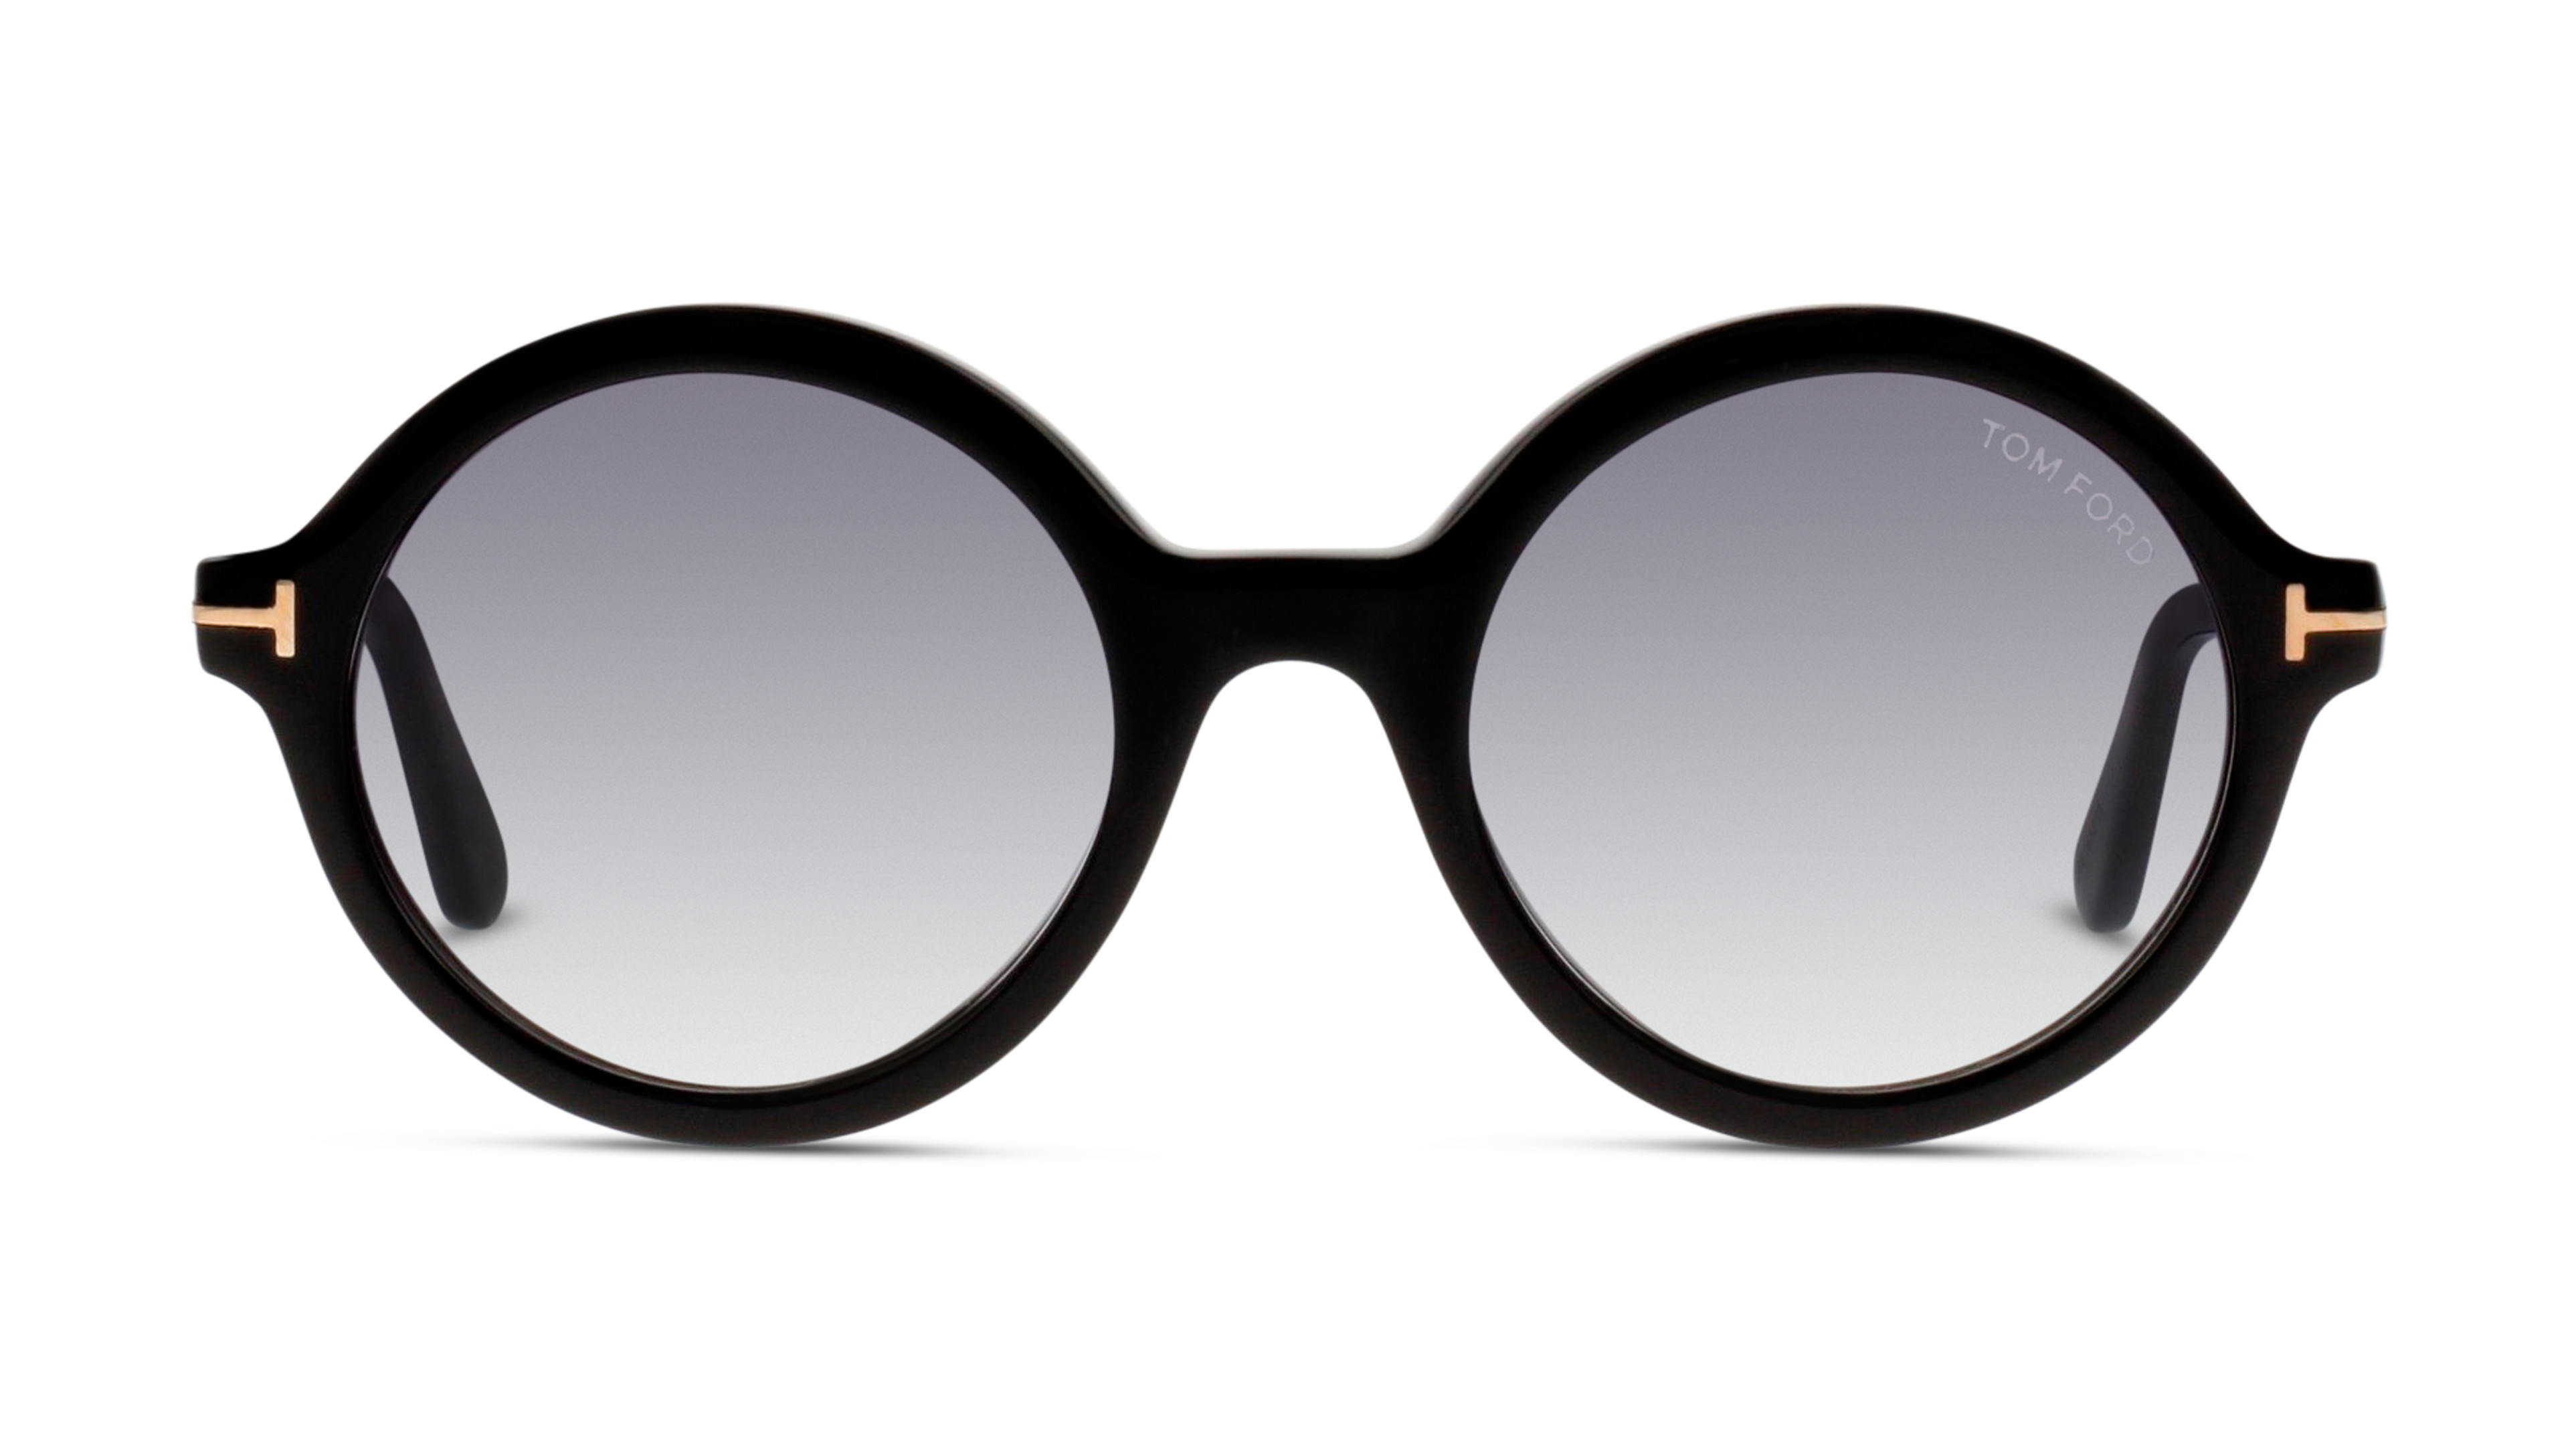 [products.image.front] Tom Ford NICOLETTE-02 FT0602 001 Sonnenbrille